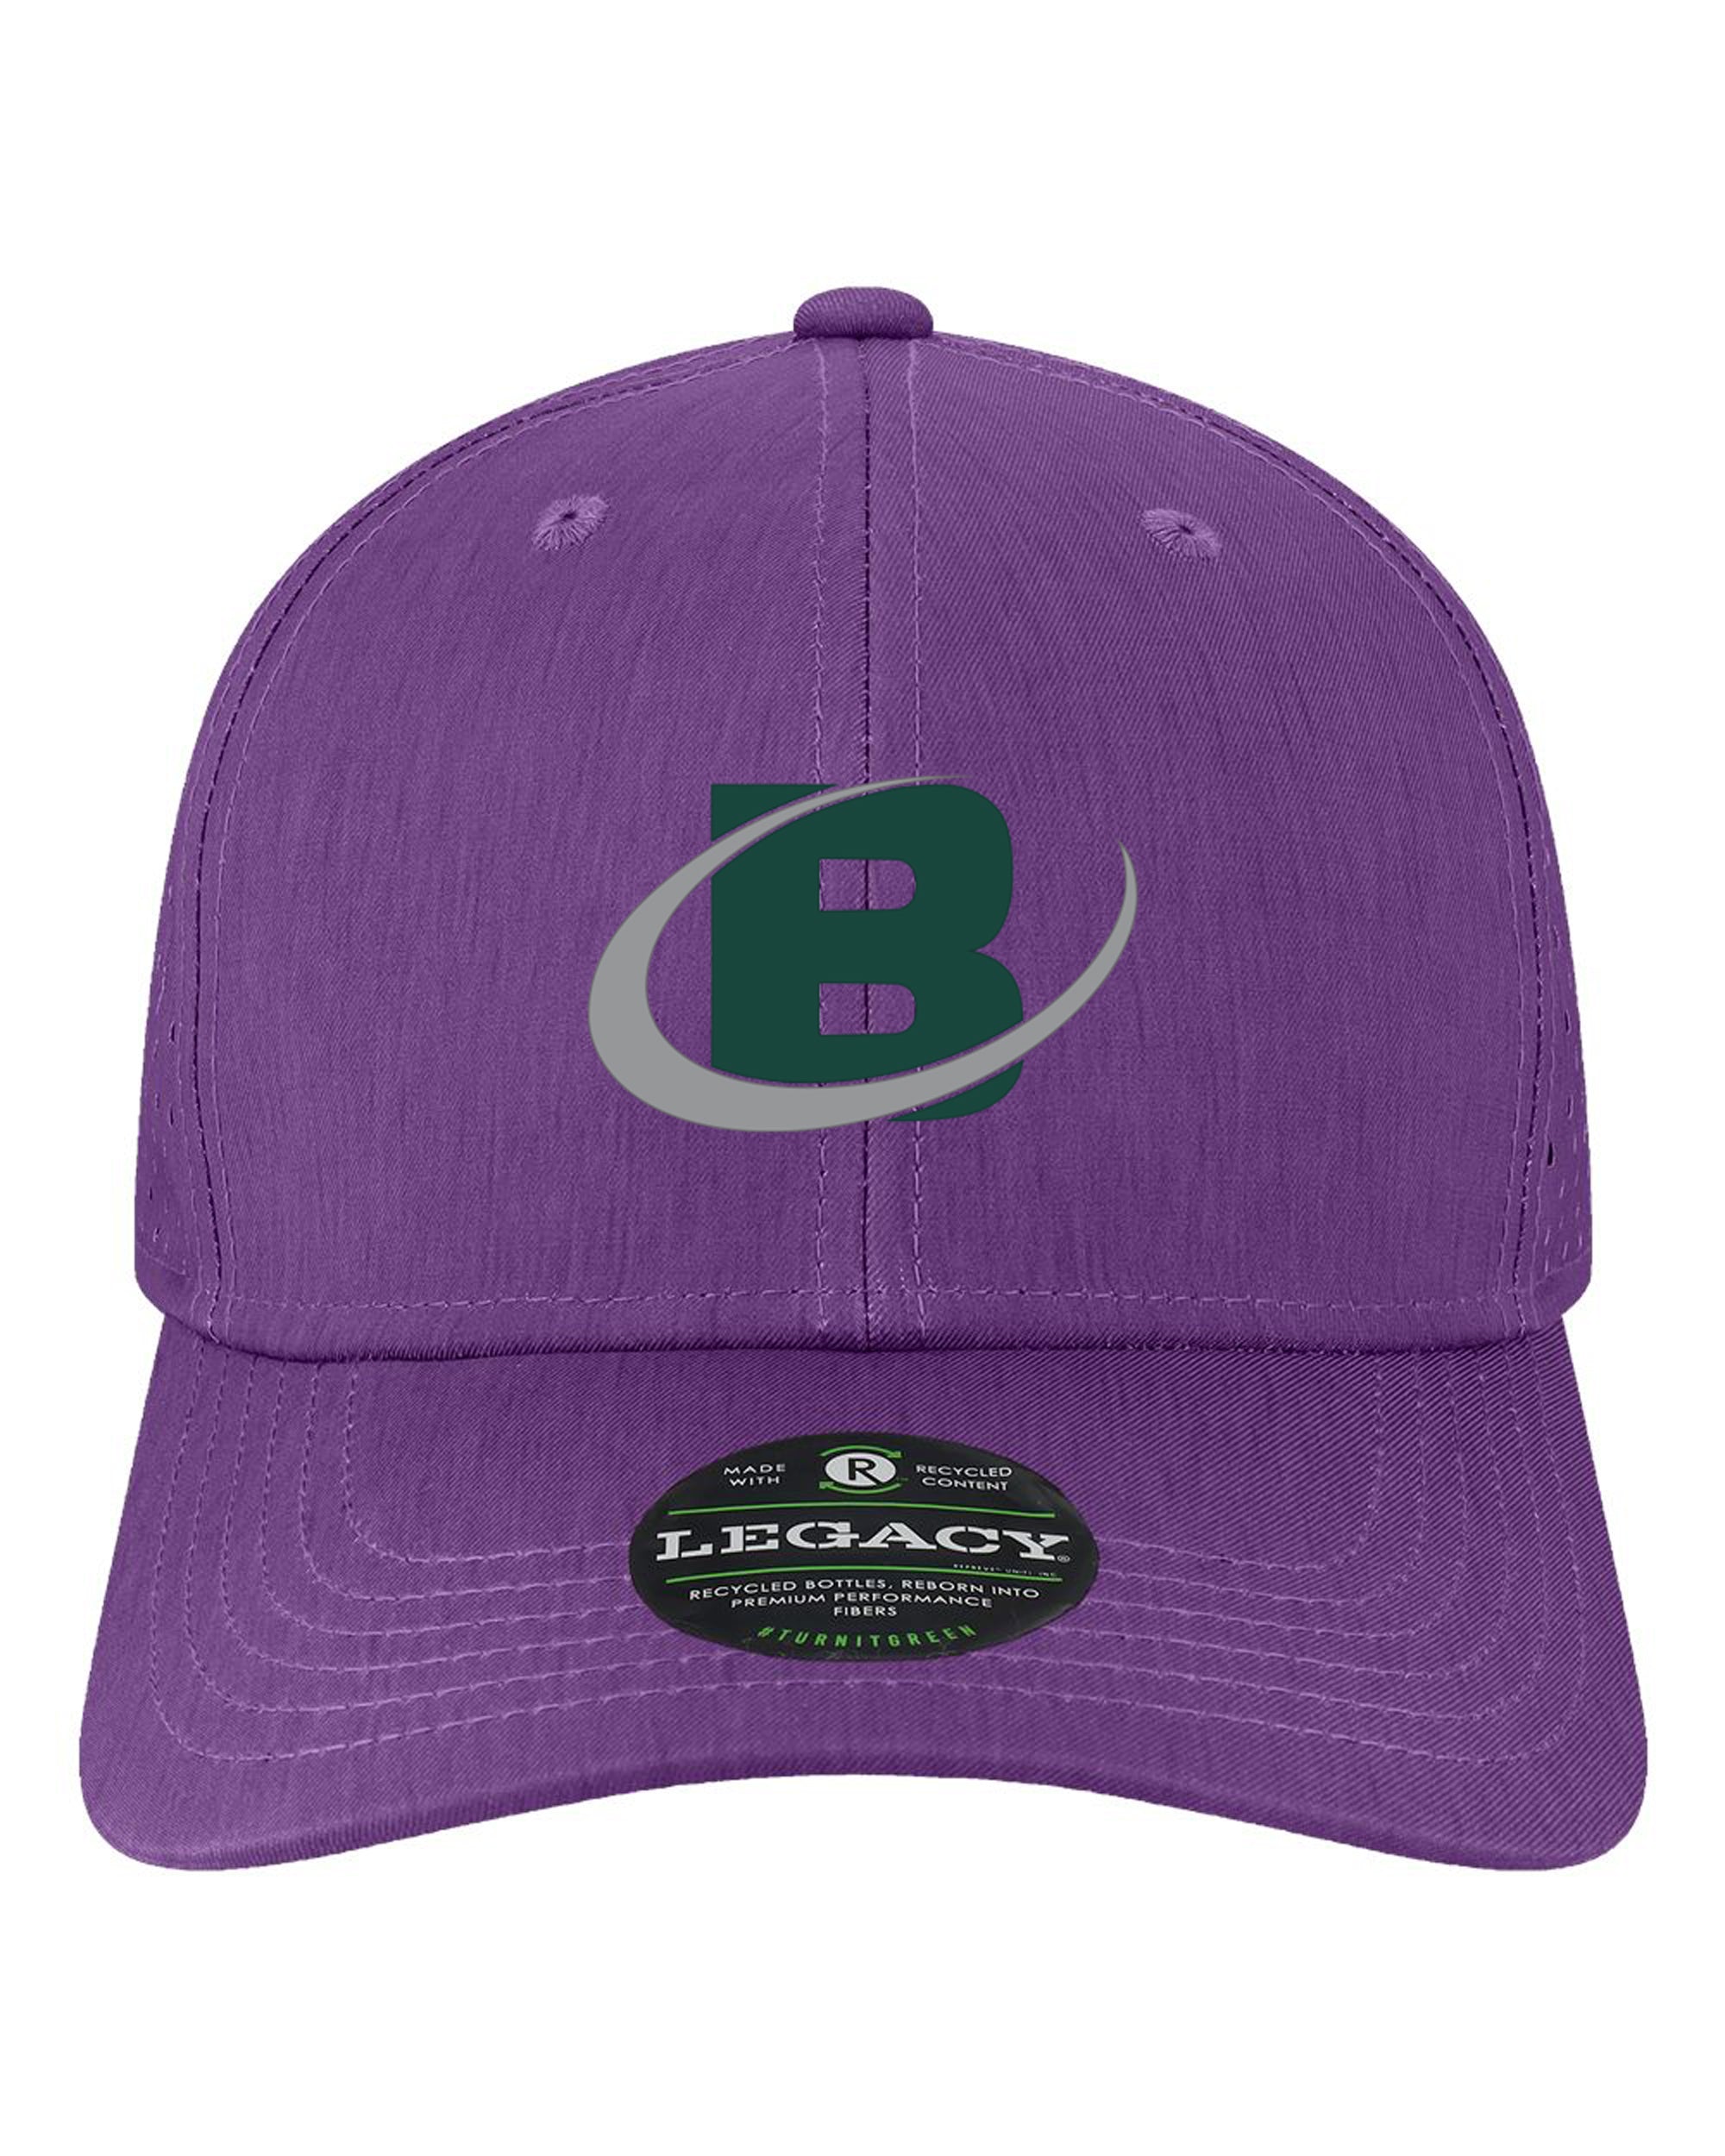 Bowman Turfgrass Professionals - Reclaimed Structured Hat